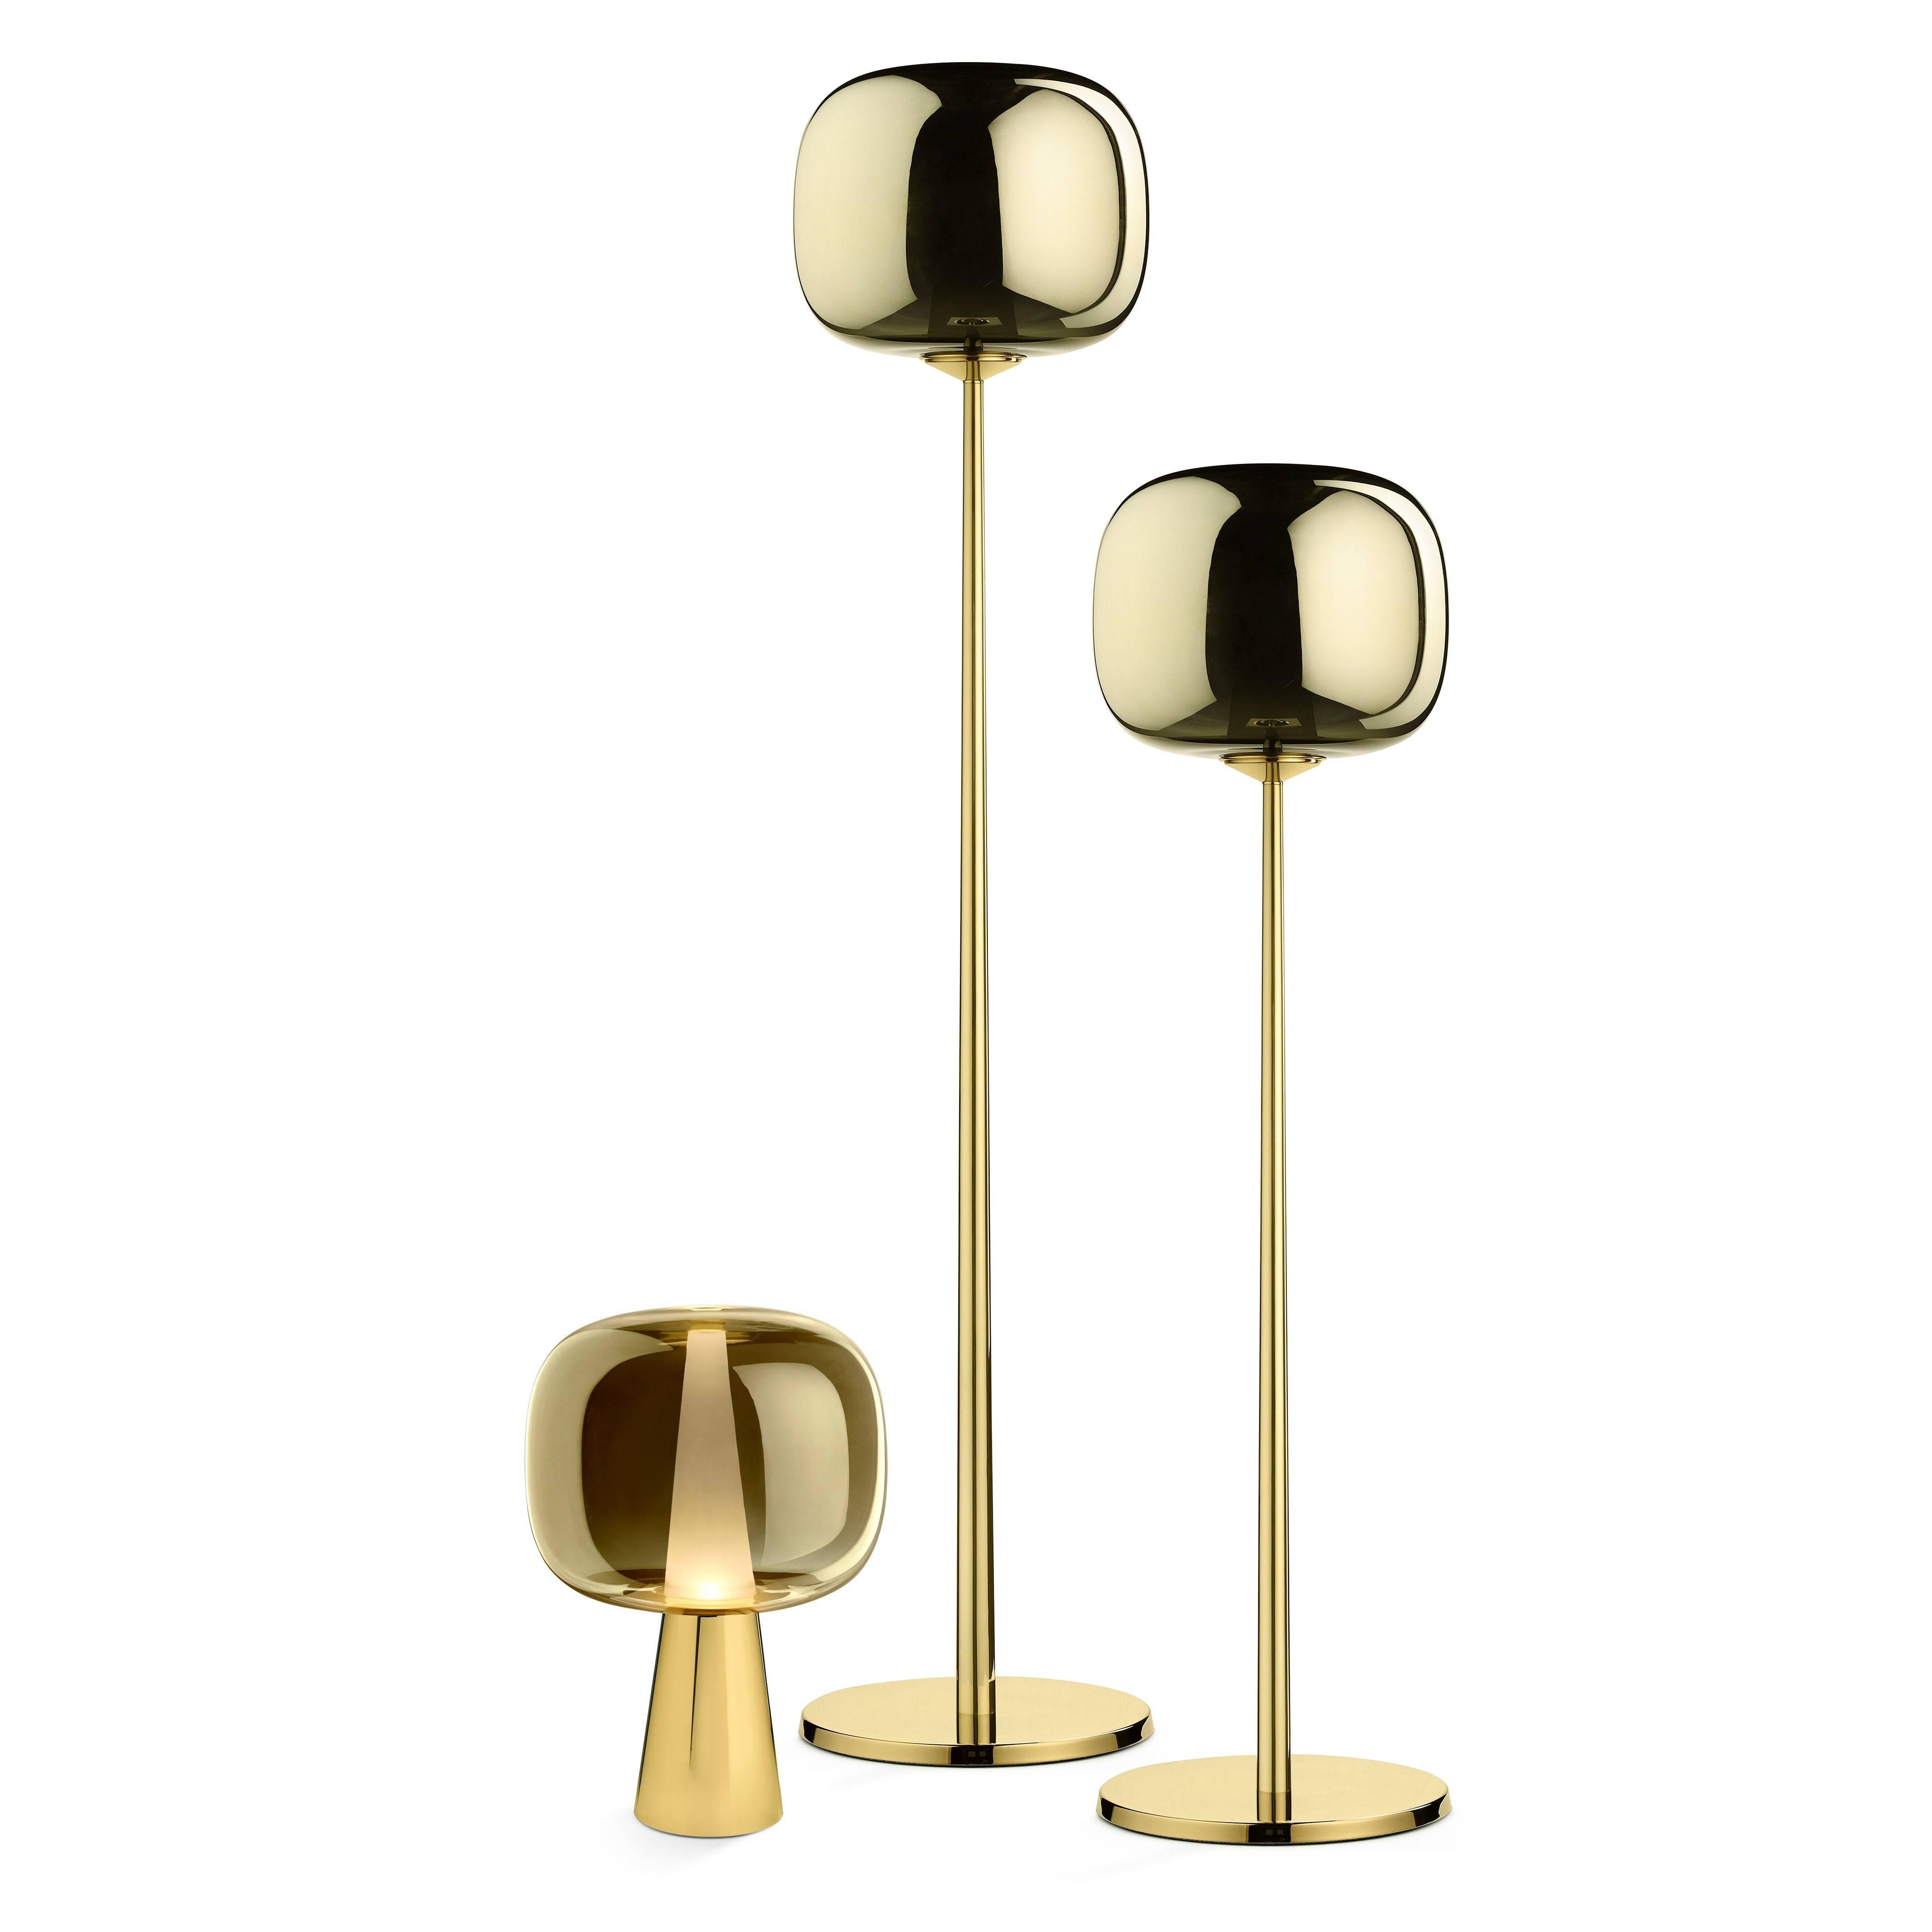 Dusk dawn table lamp in polished brass and metalized glass.